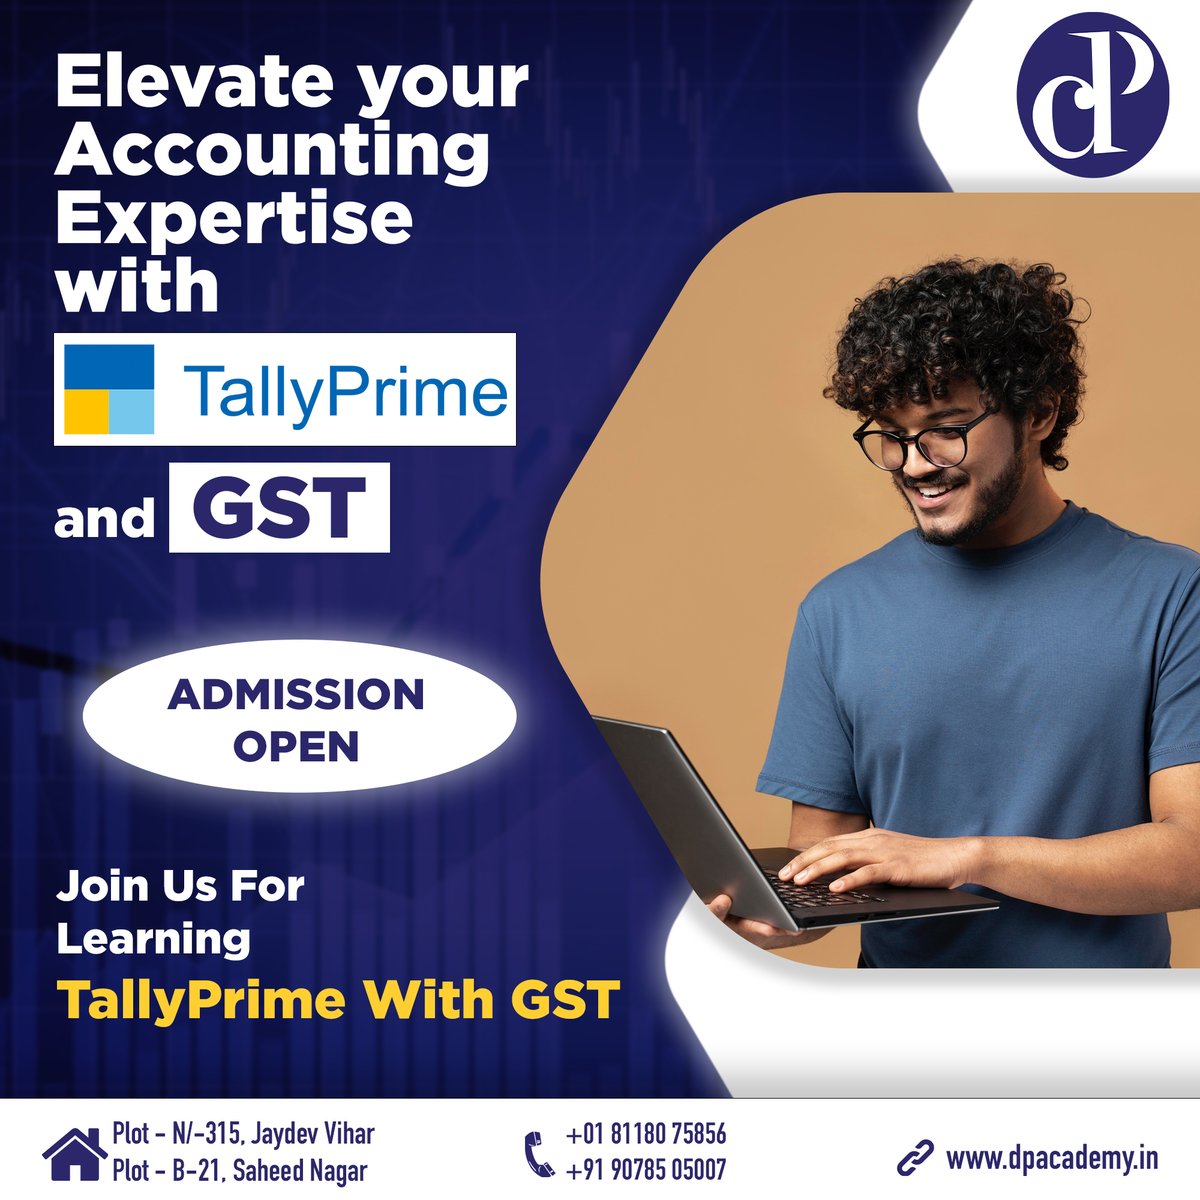 📚 Elevate your Accounting skills with Tally Prime & GST at DP Academy! 🚀✨ Admission Open! 🎓 Master streamlined accounting processes, ensure GST compliance, and boost your career. Limited seats! 🌐 Enroll now.

#dpacademy #tallyprime #GST #AccountingExpertise #CareerBoost